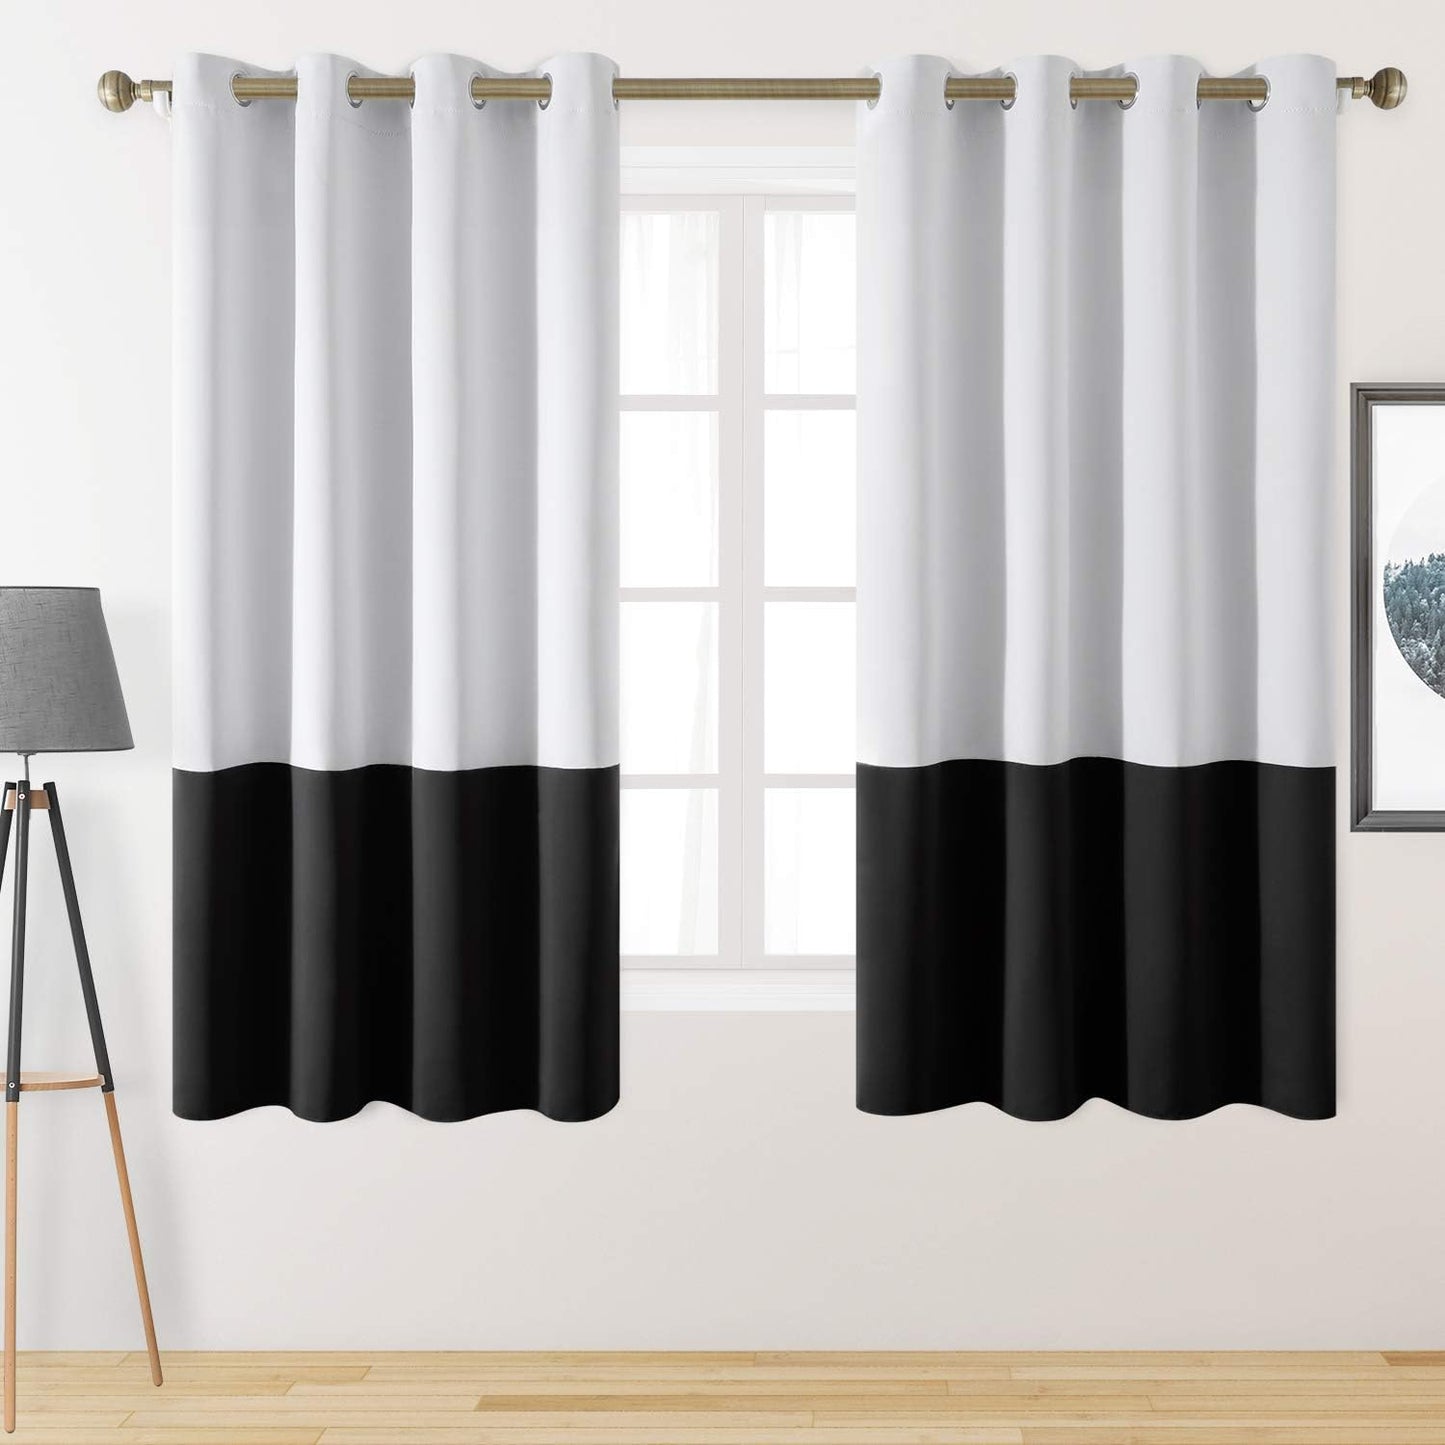 HOMEIDEAS Navy Blue Ombre Blackout Curtains 52 X 84 Inch Length Gradient Room Darkening Thermal Insulated Energy Saving Grommet 2 Panels Window Drapes for Living Room/Bedroom  HOMEIDEAS White/Black 52"W X 63"L 